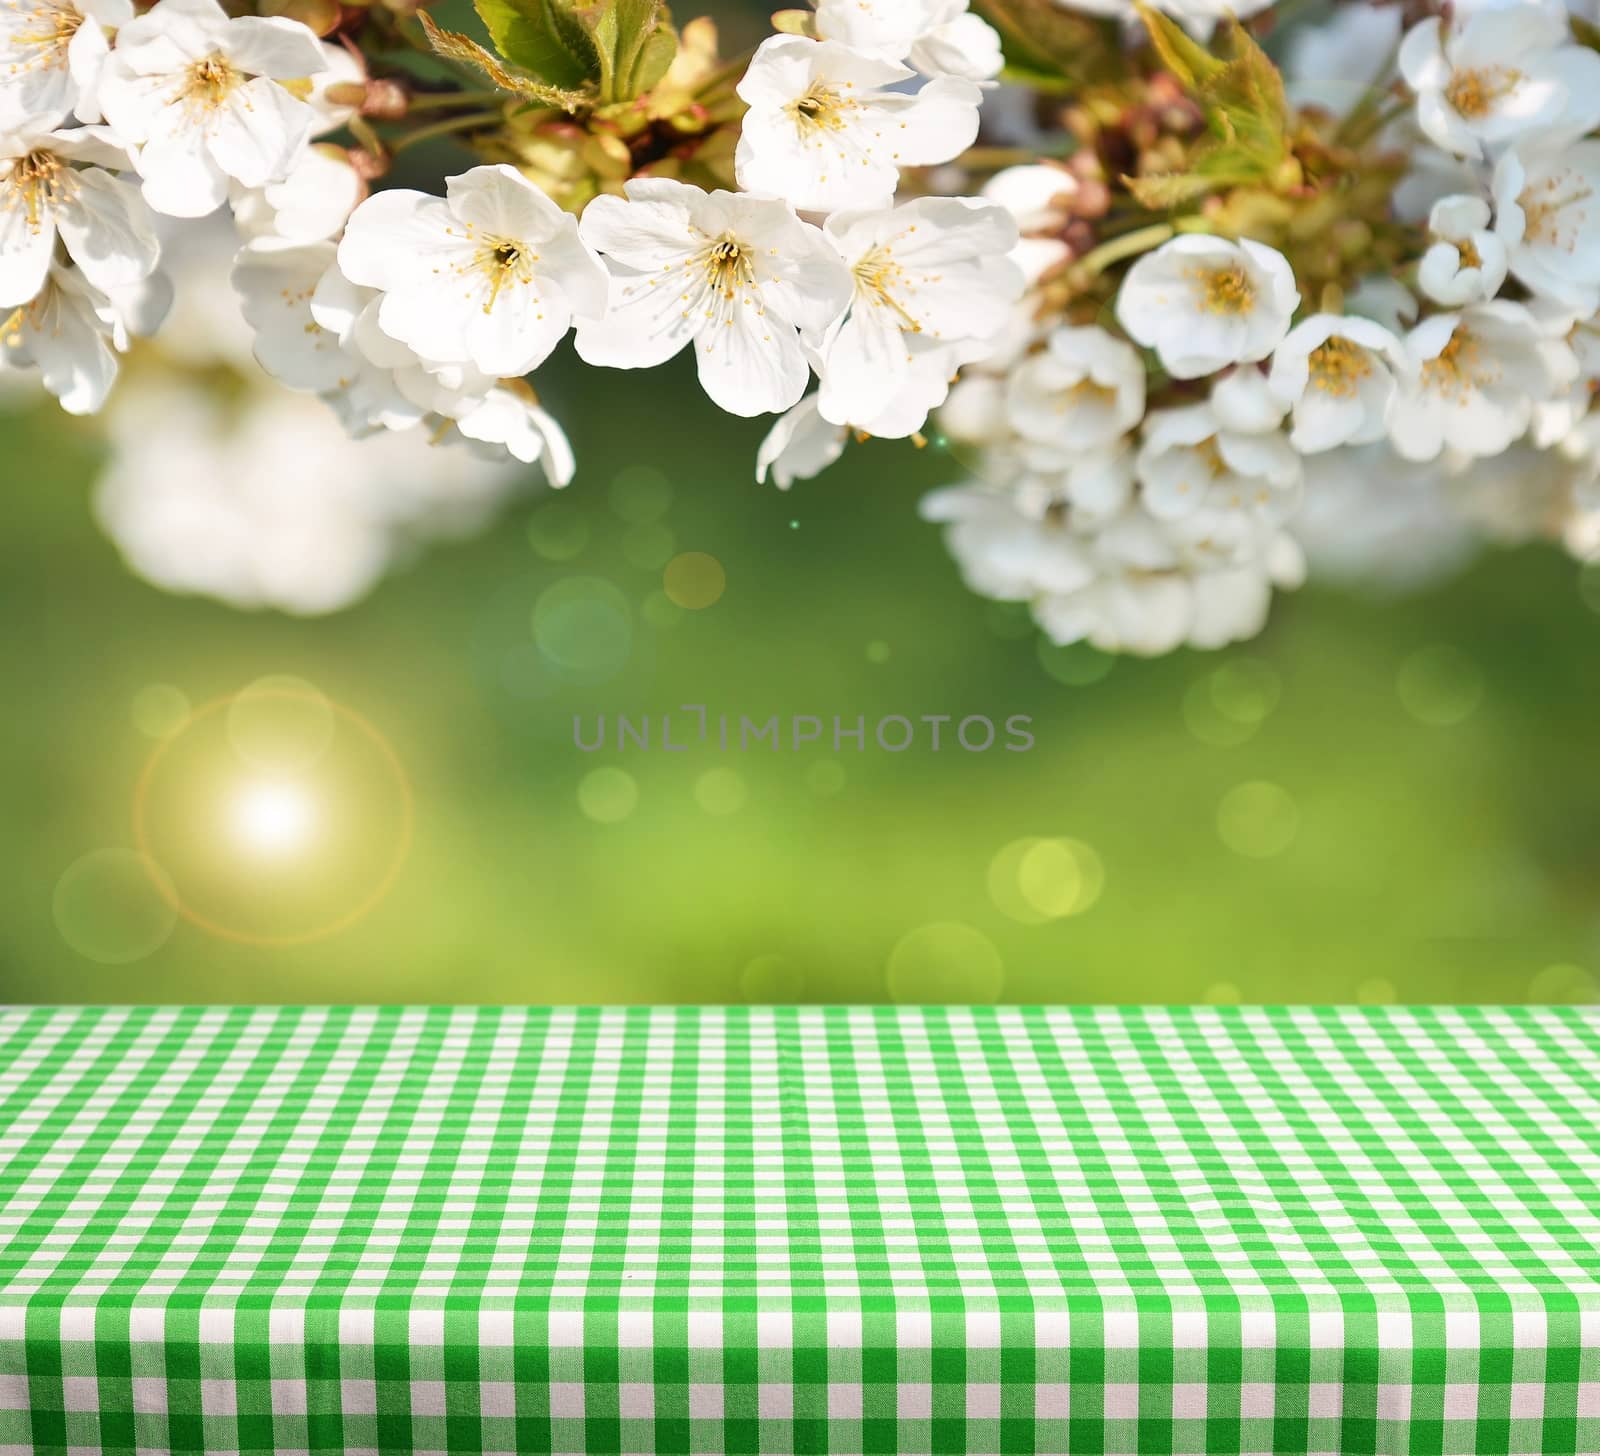 Empty checkered table with spring flowers in background